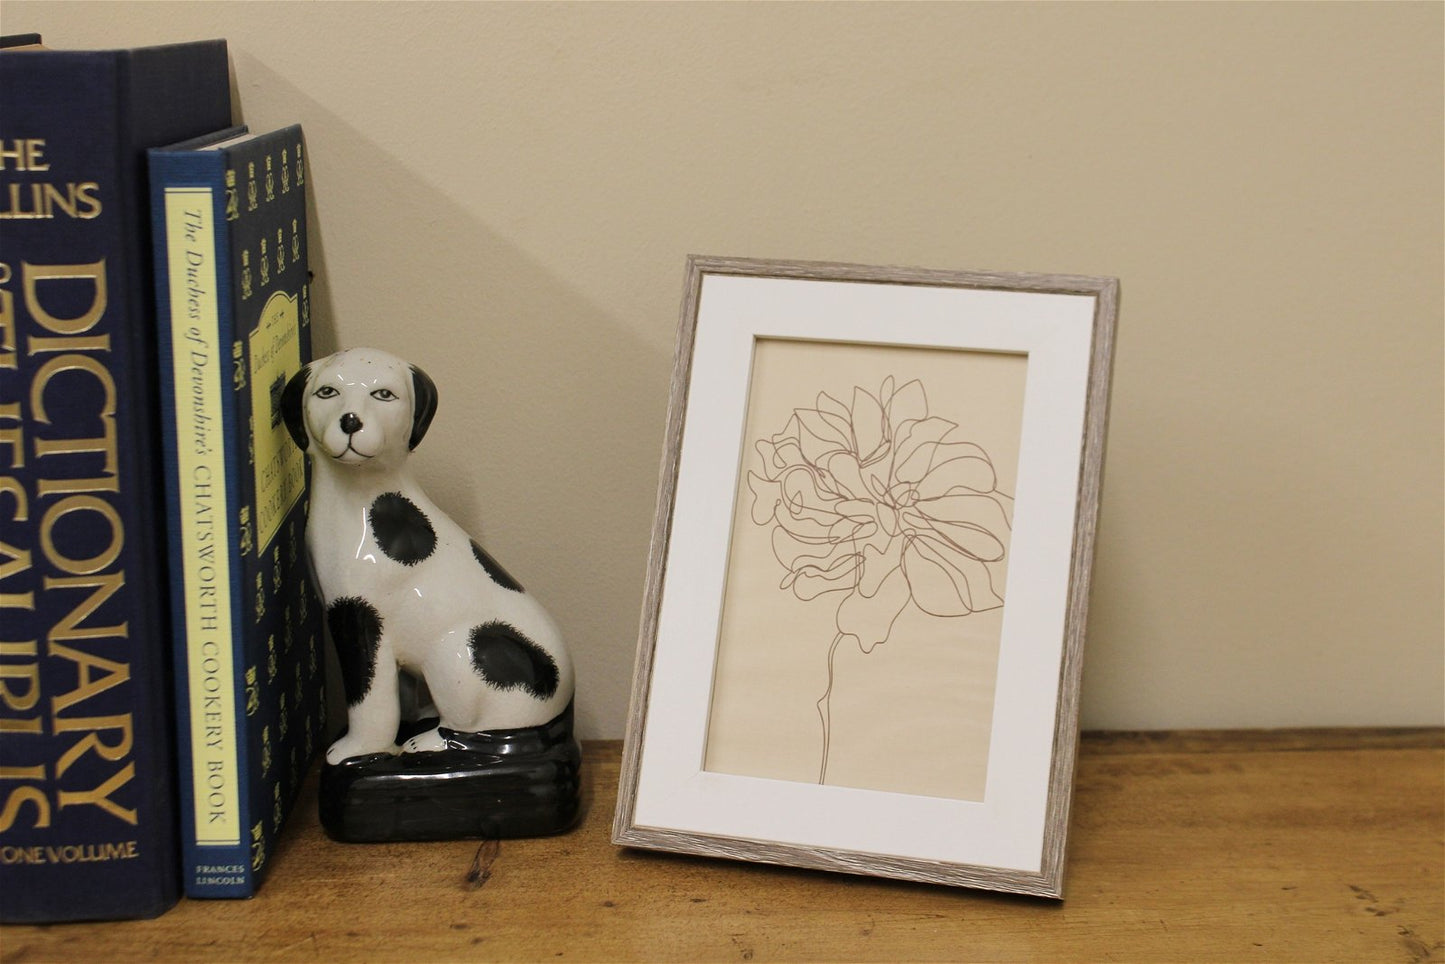 Set of Three Photo Frames with Wood Edge - a Cheeky Plant